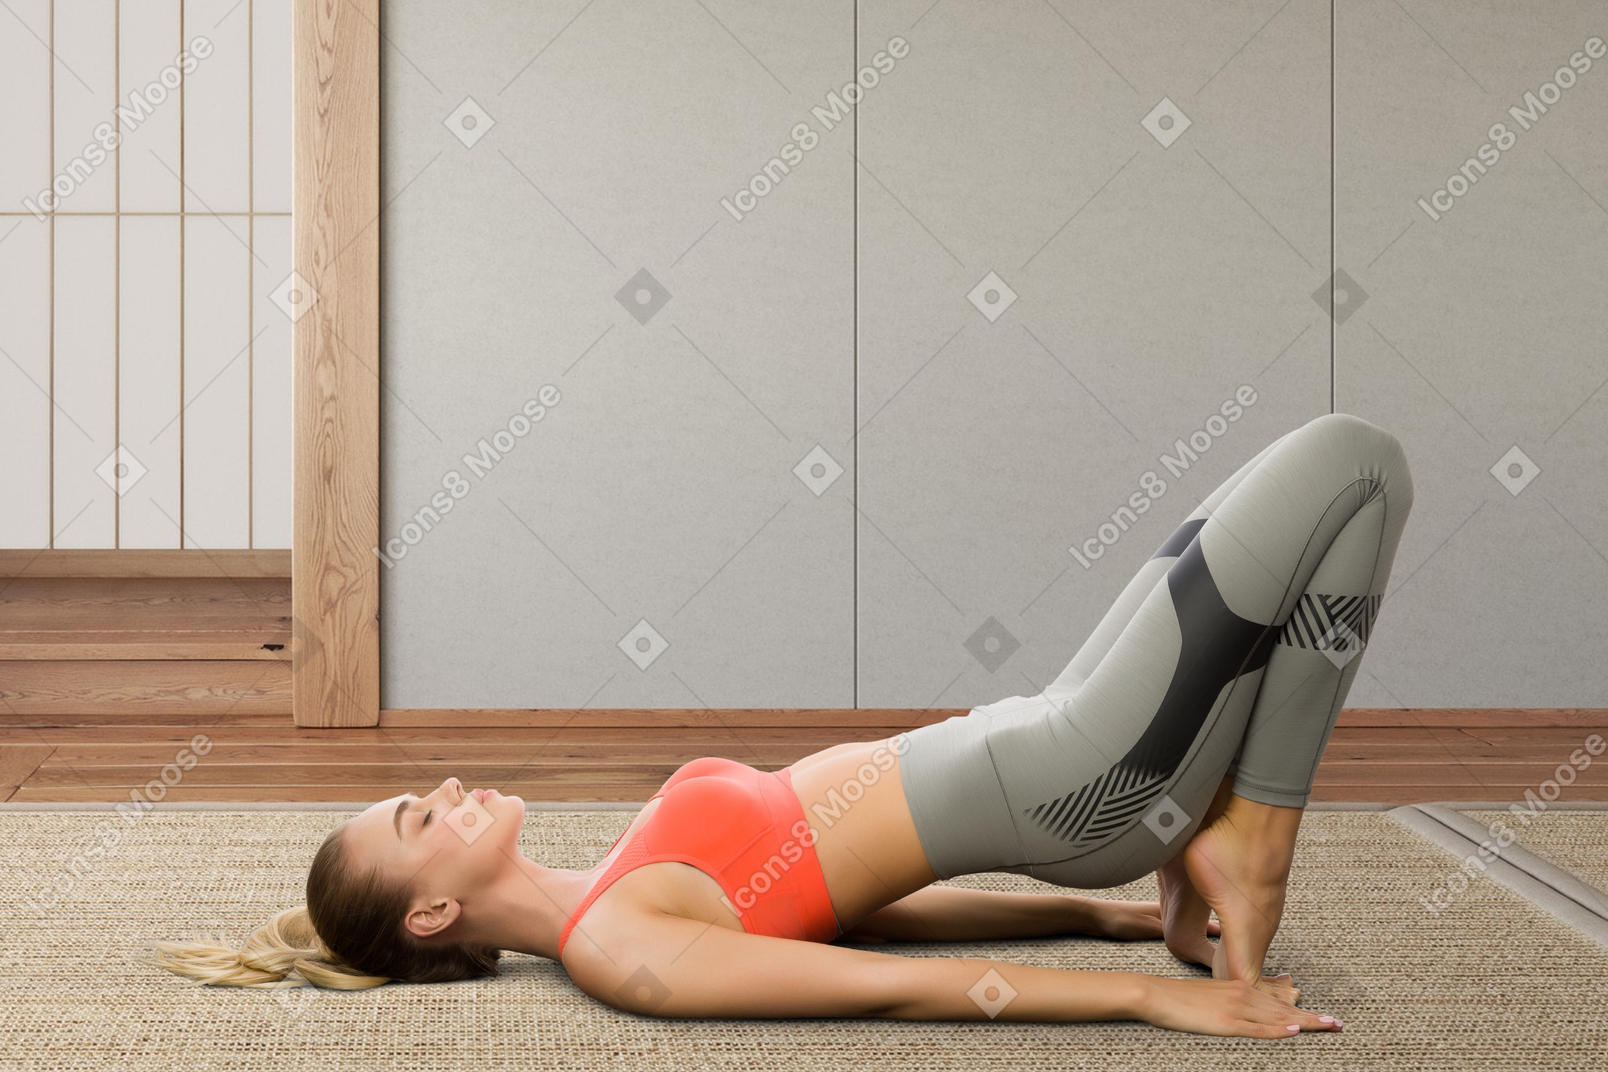 A woman is doing a yoga pose on the floor